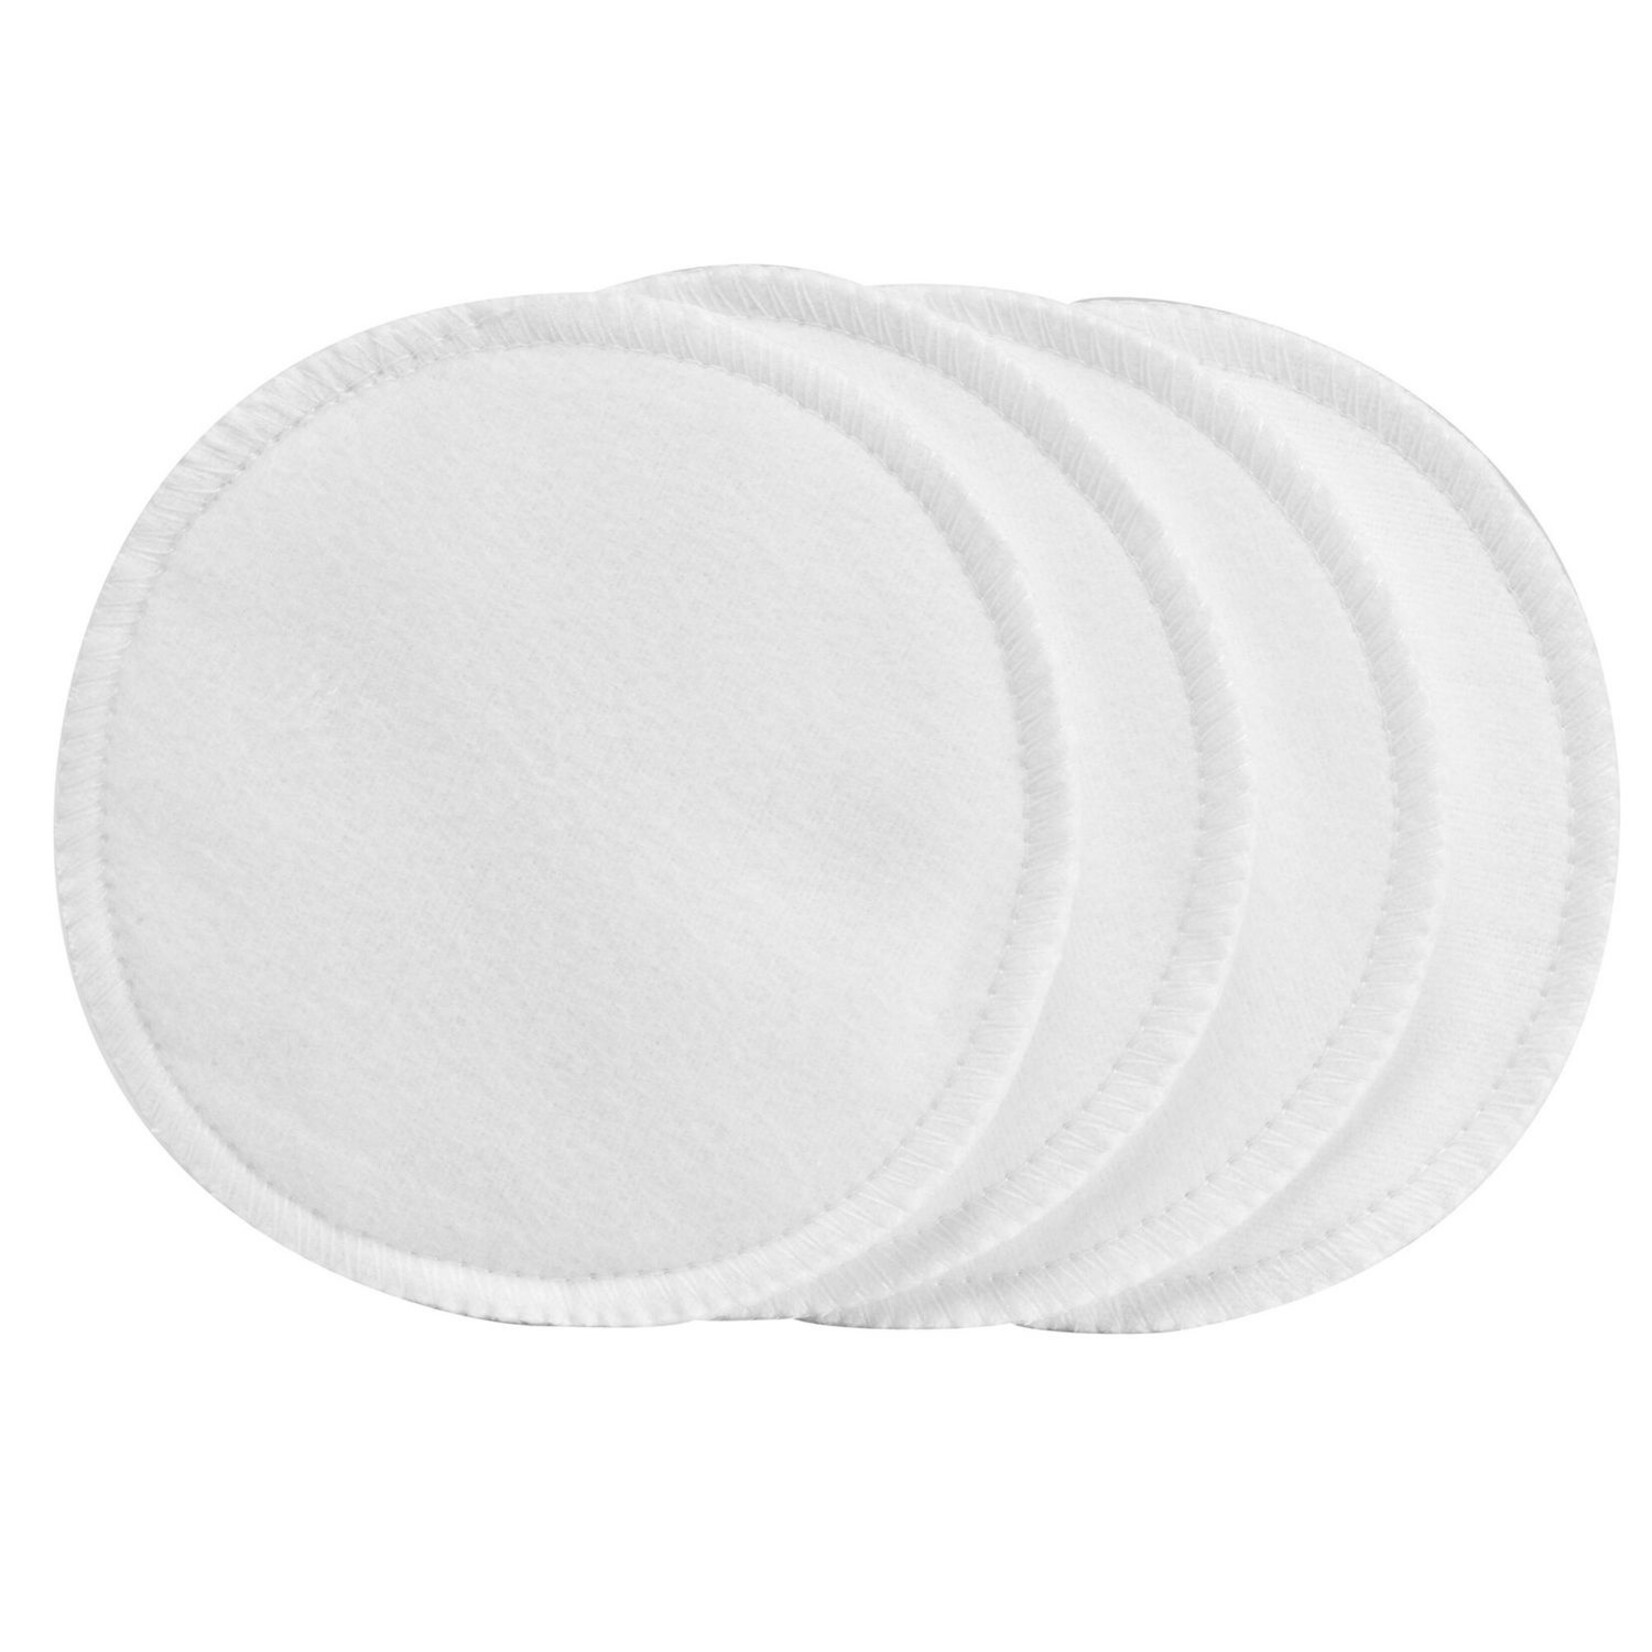 Dr Browns DR BROWNS WASHABLE BREAST PADS 4PK